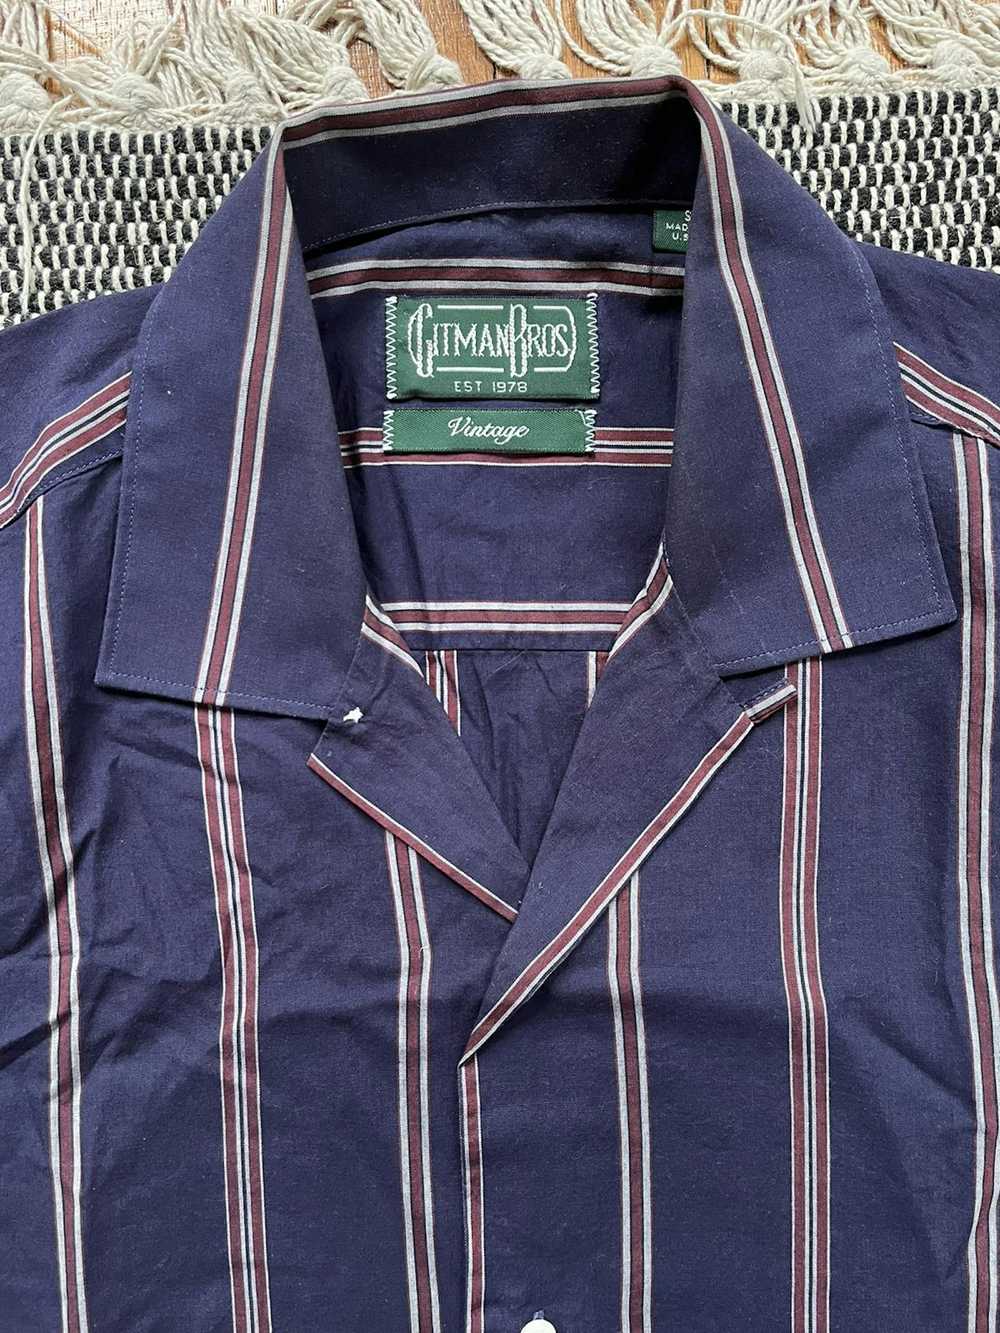 Gitman Bros. Vintage × Made In Usa SS19 cotton an… - image 3